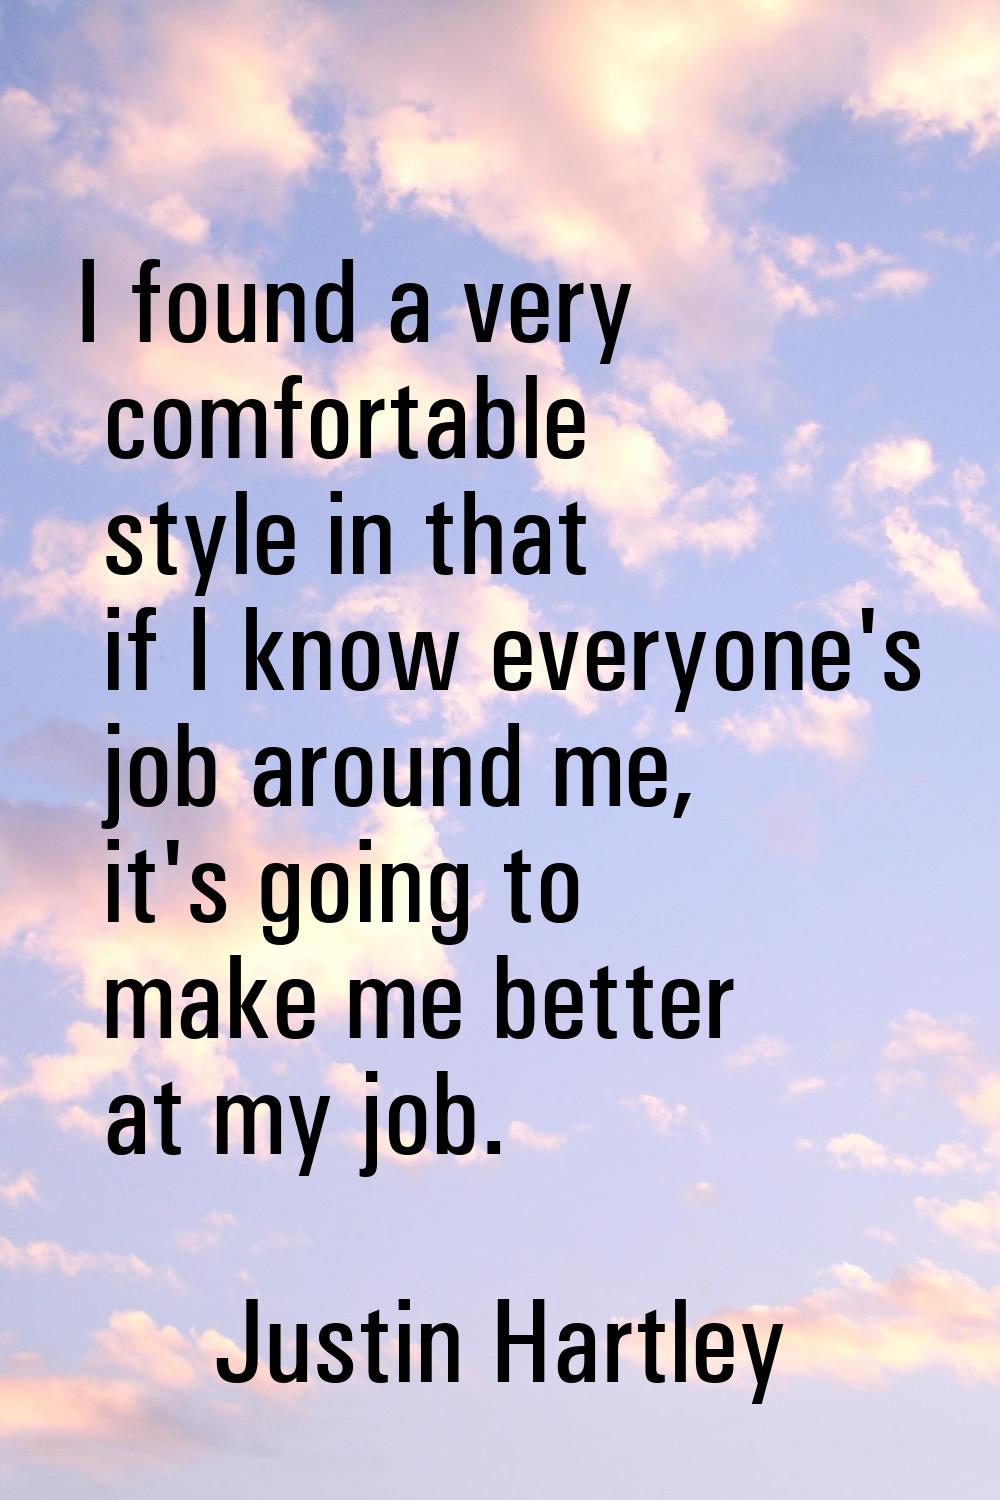 I found a very comfortable style in that if I know everyone's job around me, it's going to make me 